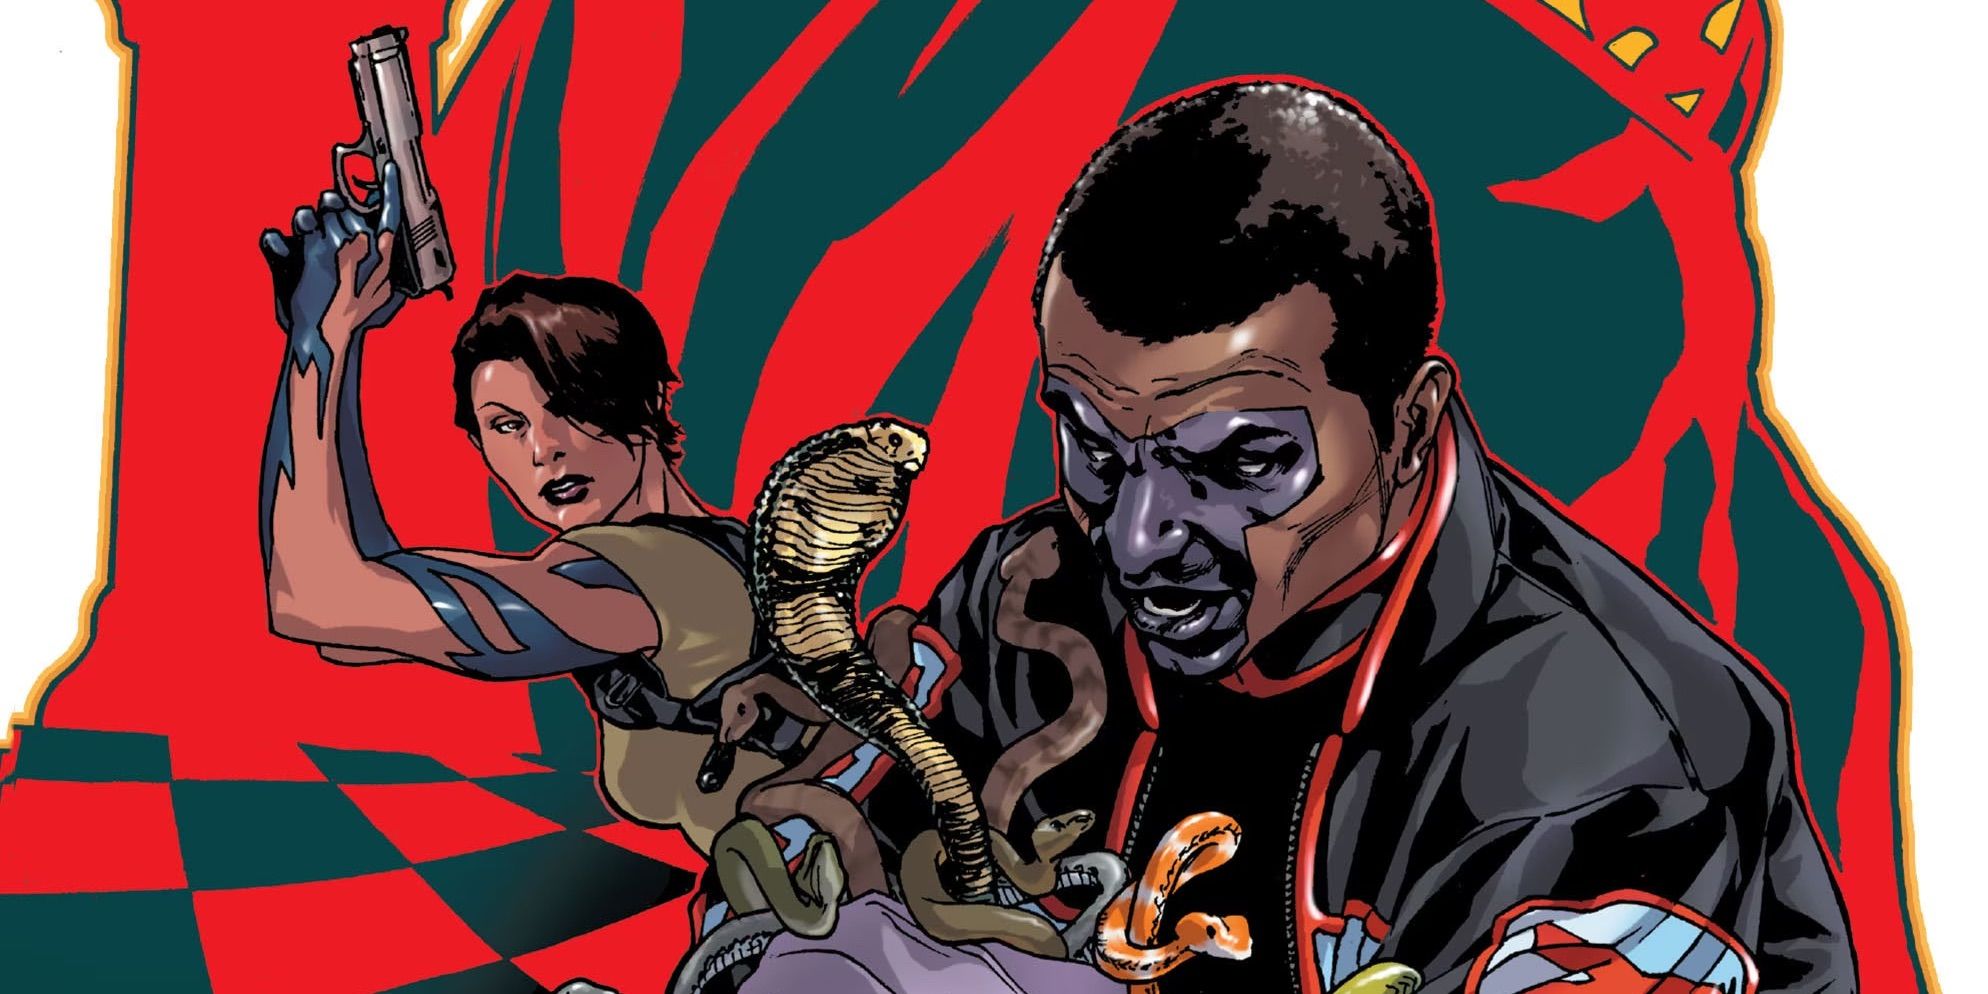 Checkmate members Sasha Bordeaux holds a gun and Mr. Terrific holds snakes